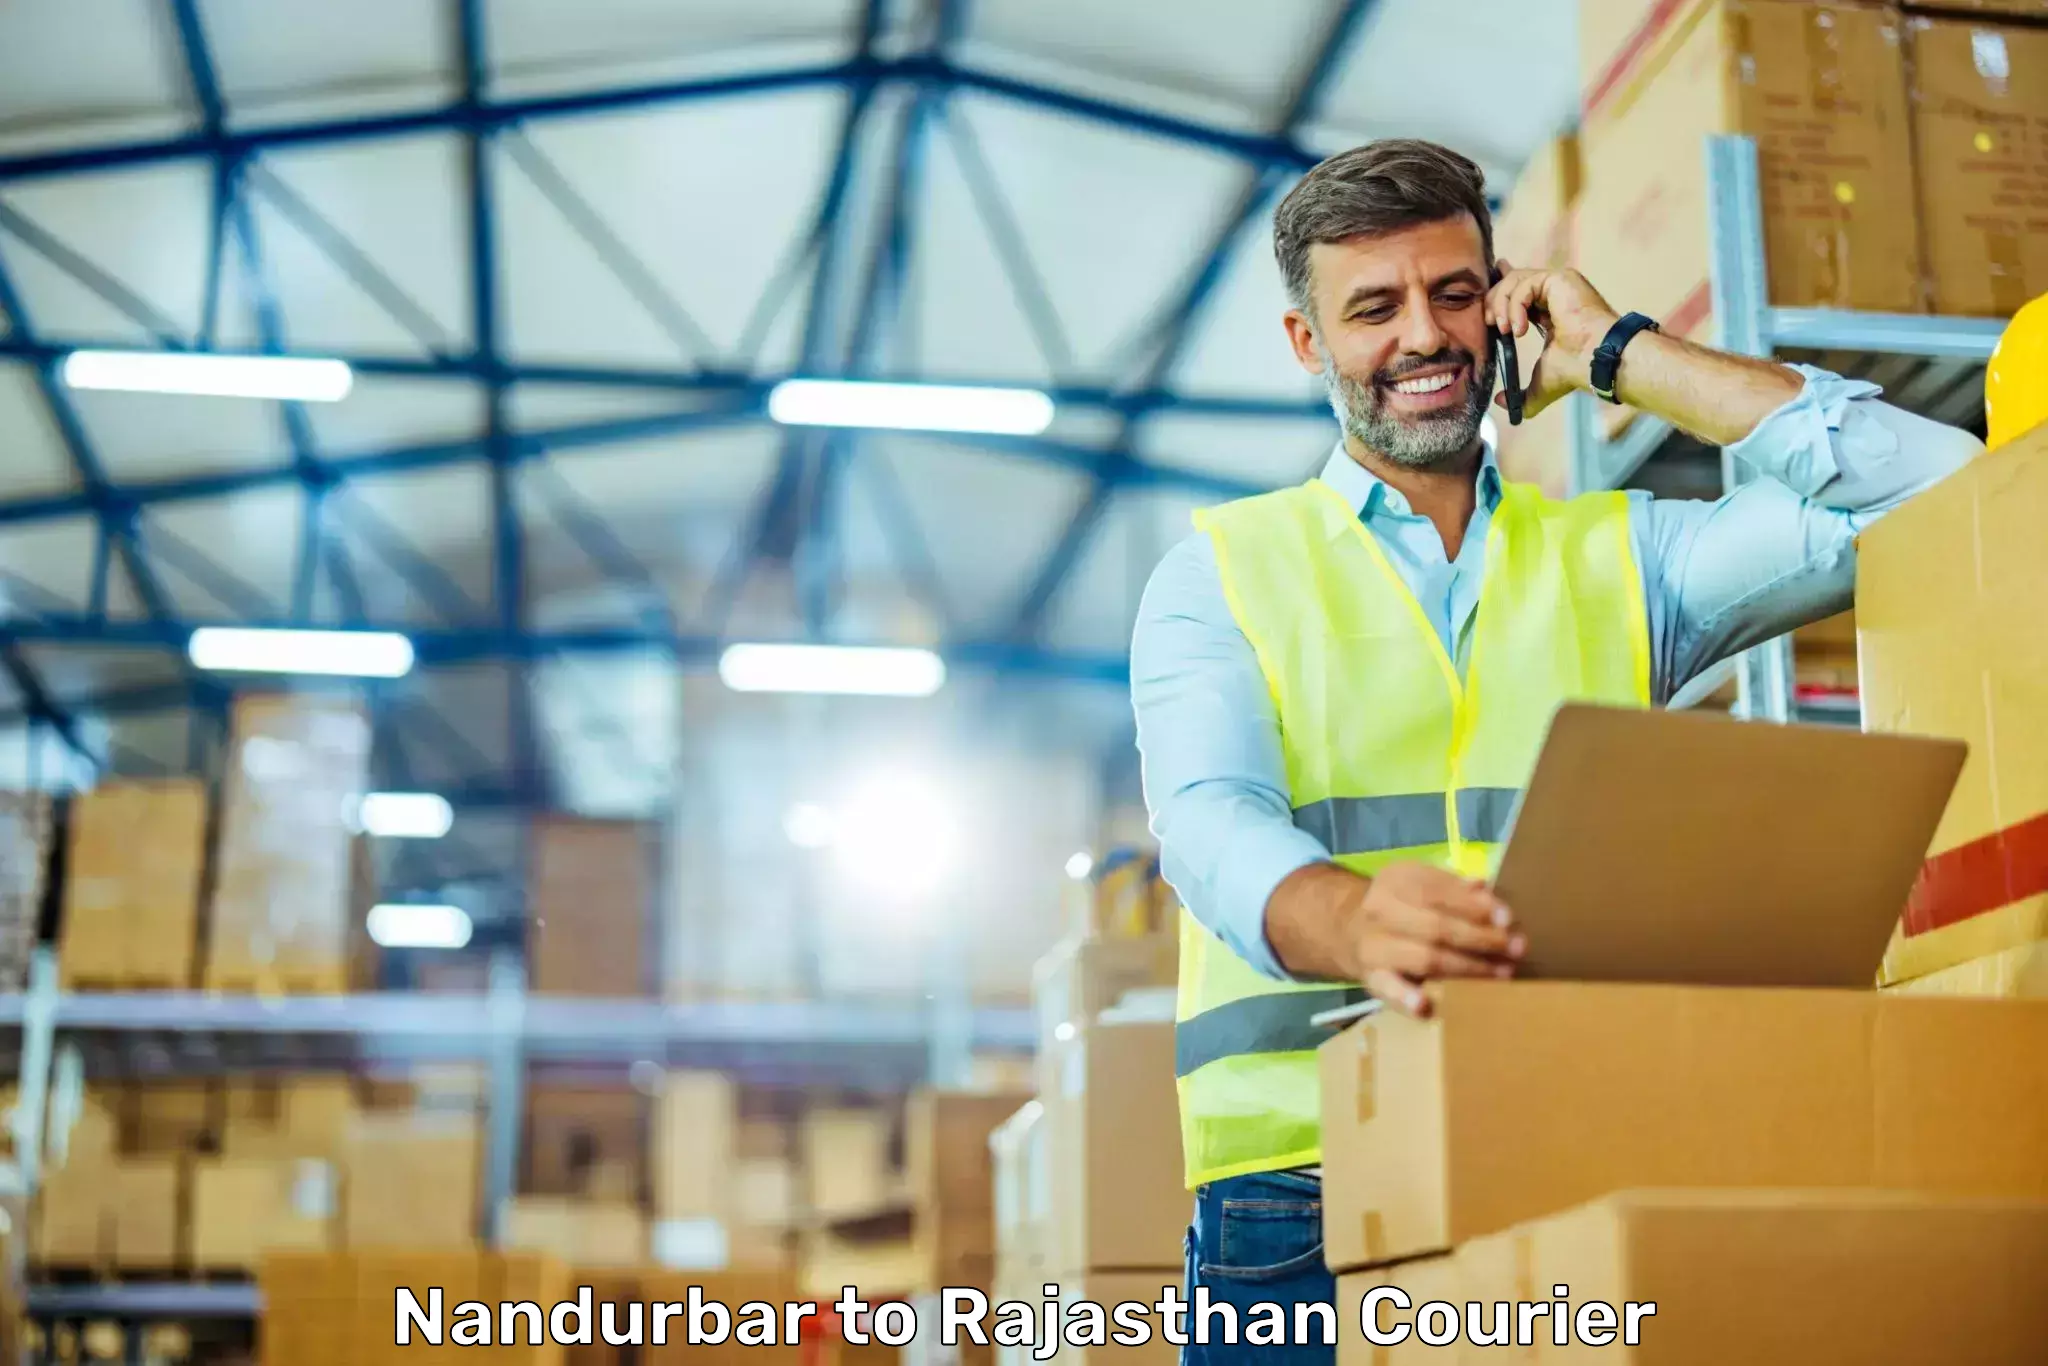 Fast delivery service Nandurbar to Rajasthan